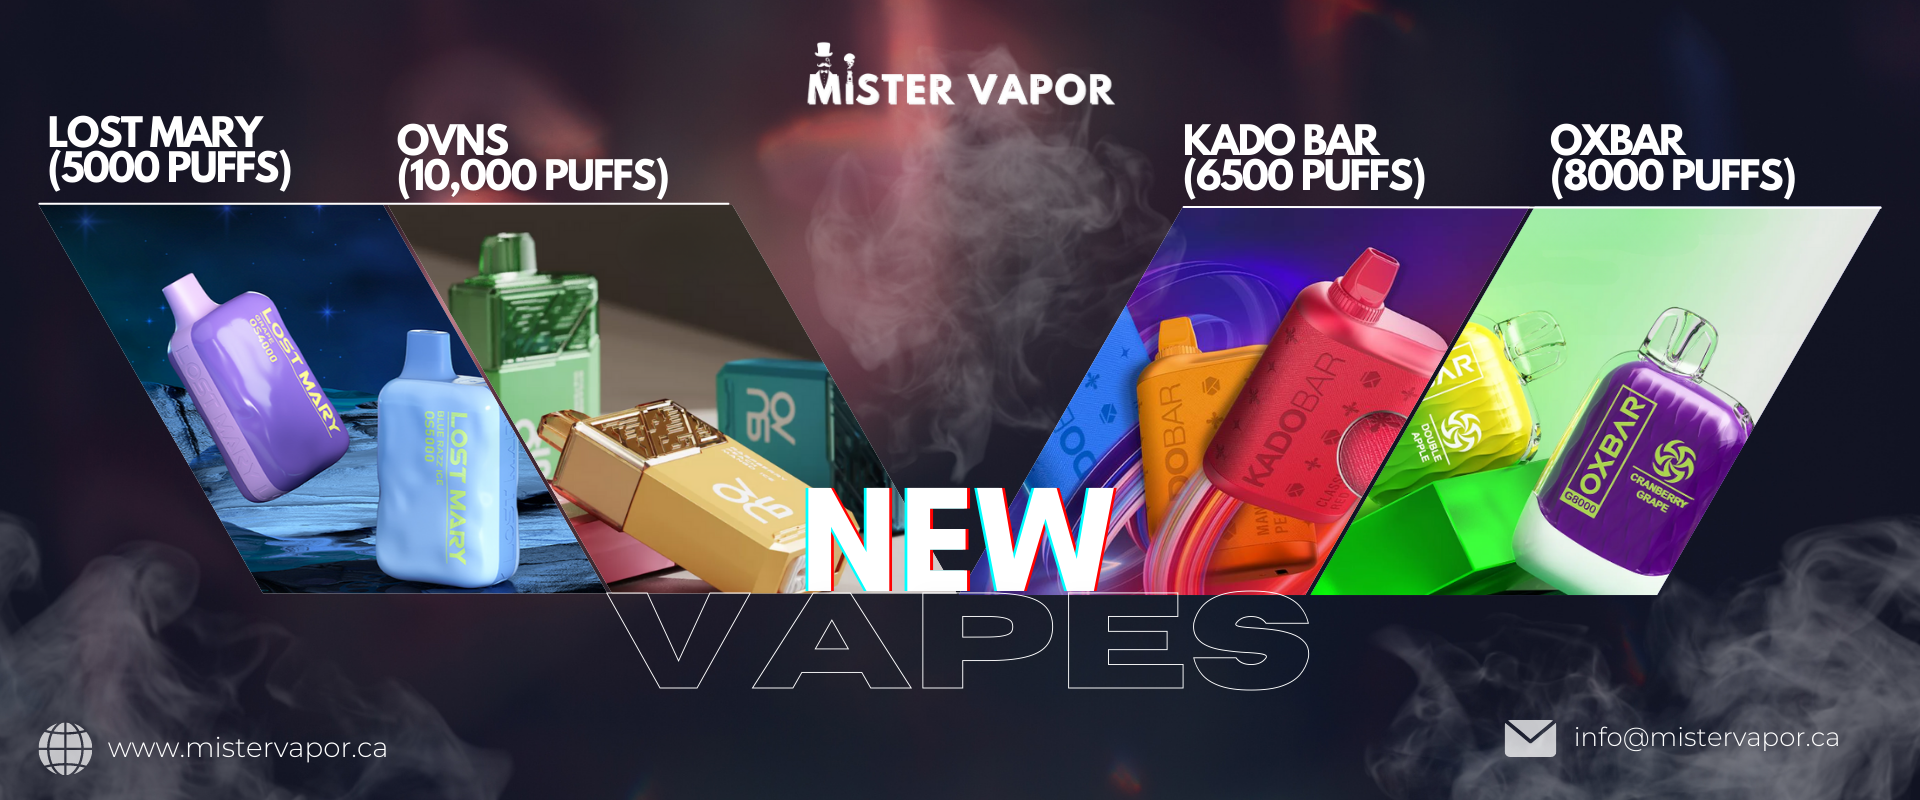 1. BEST DISPOSABLE VAPE STICK SELECTION available at Mister Vapor Canada